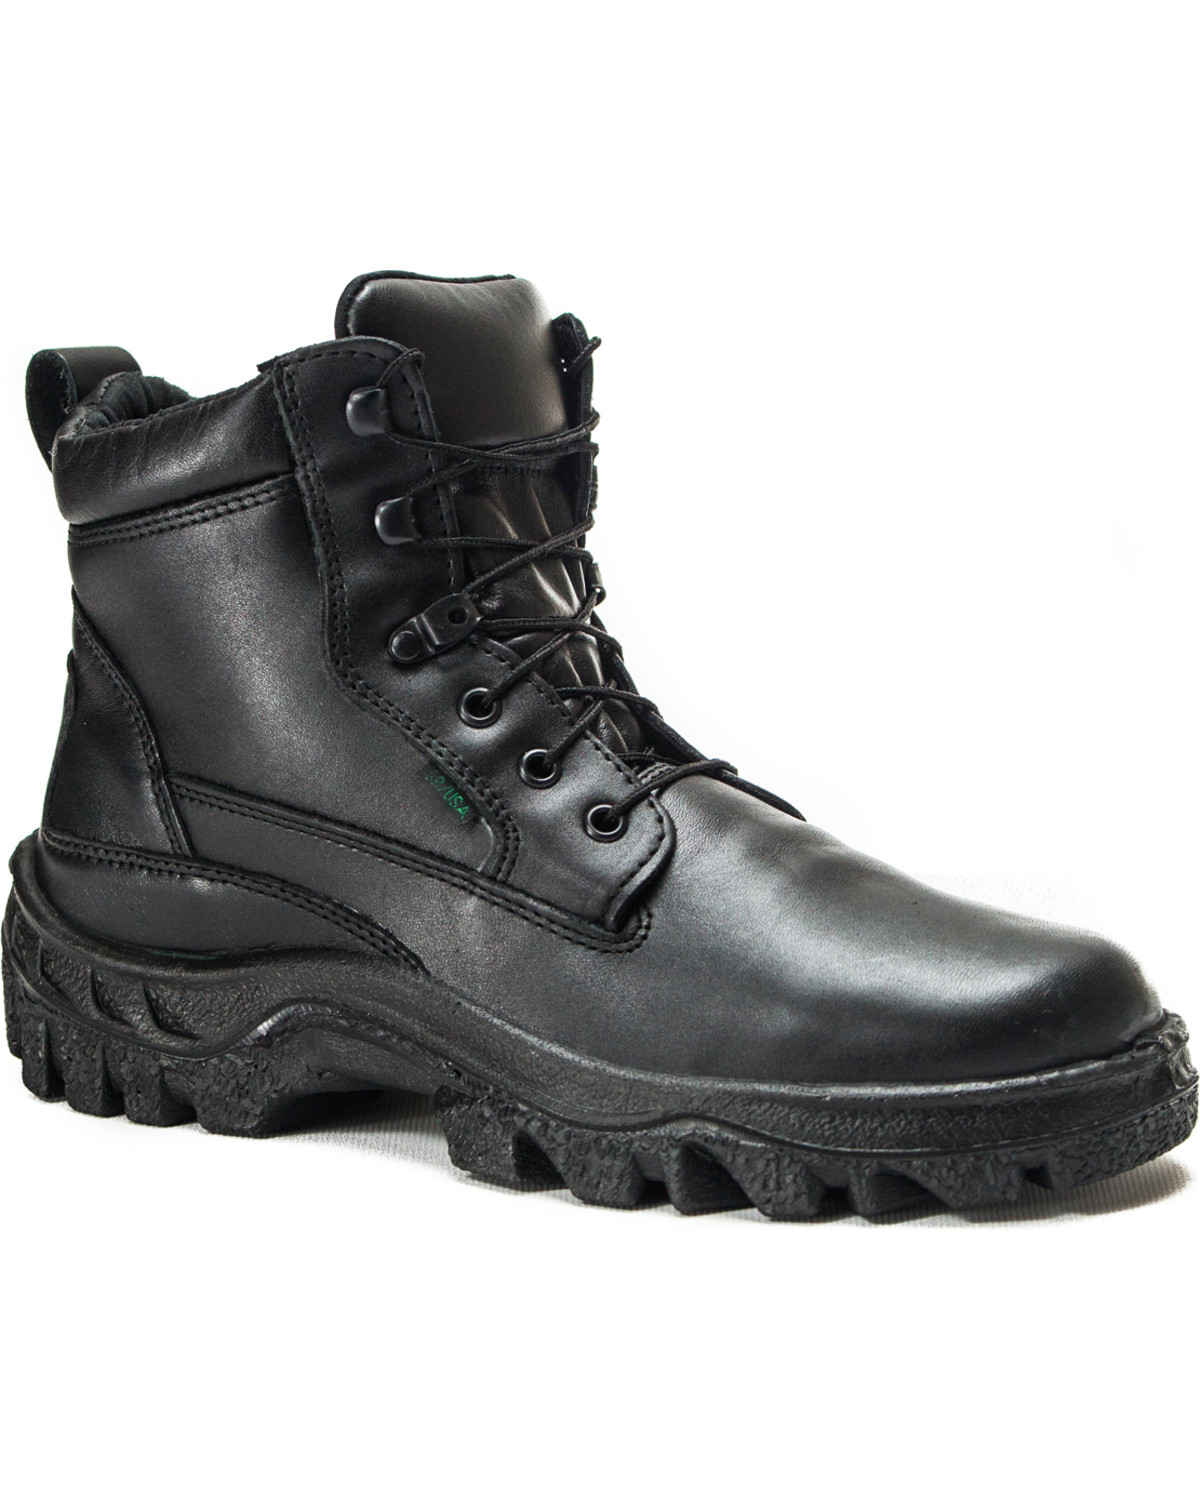 TMC Postal Approved Duty Boots | Boot Barn